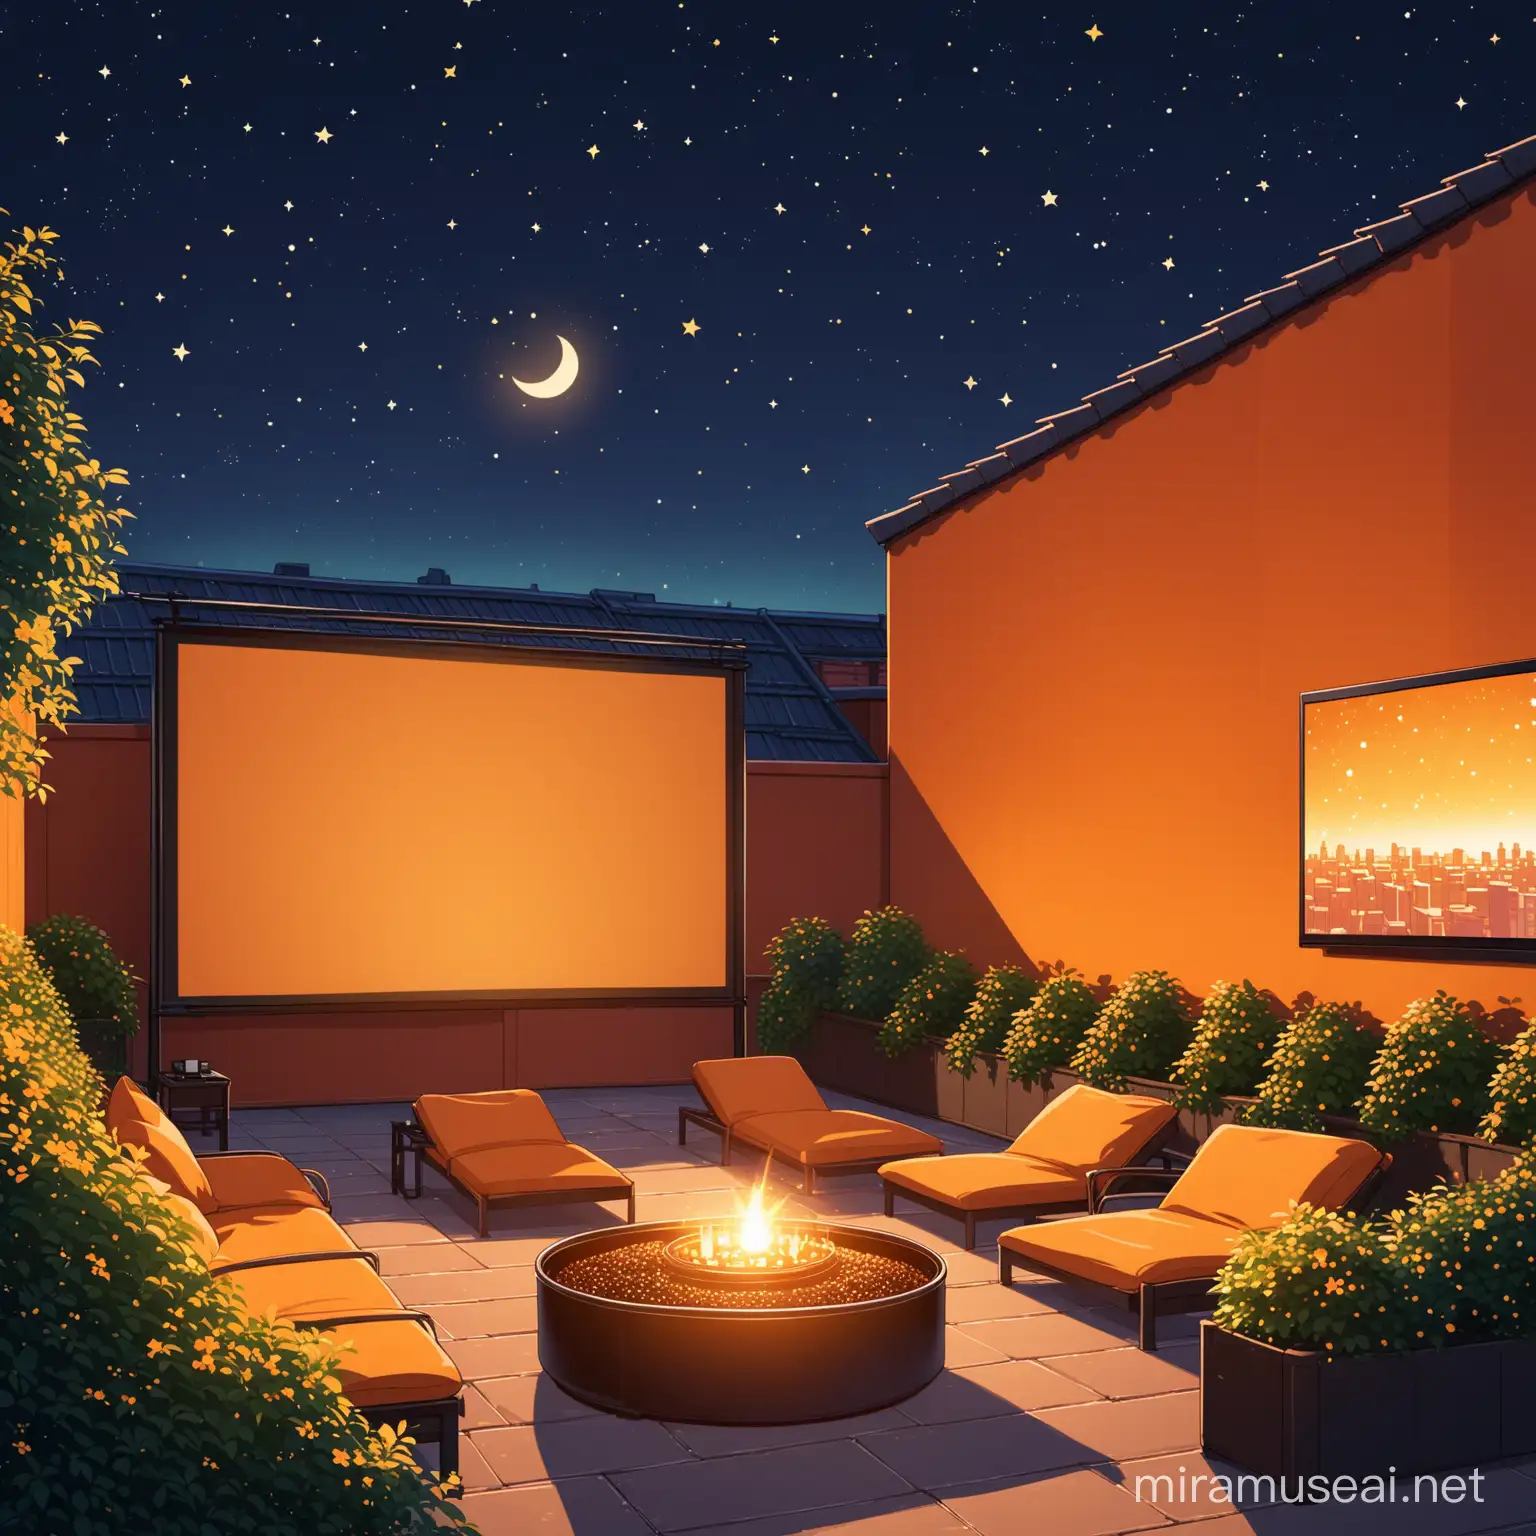 Animation image of  movie night cinema large screen in a cozy rooftop garden with an orange background color as the night sky